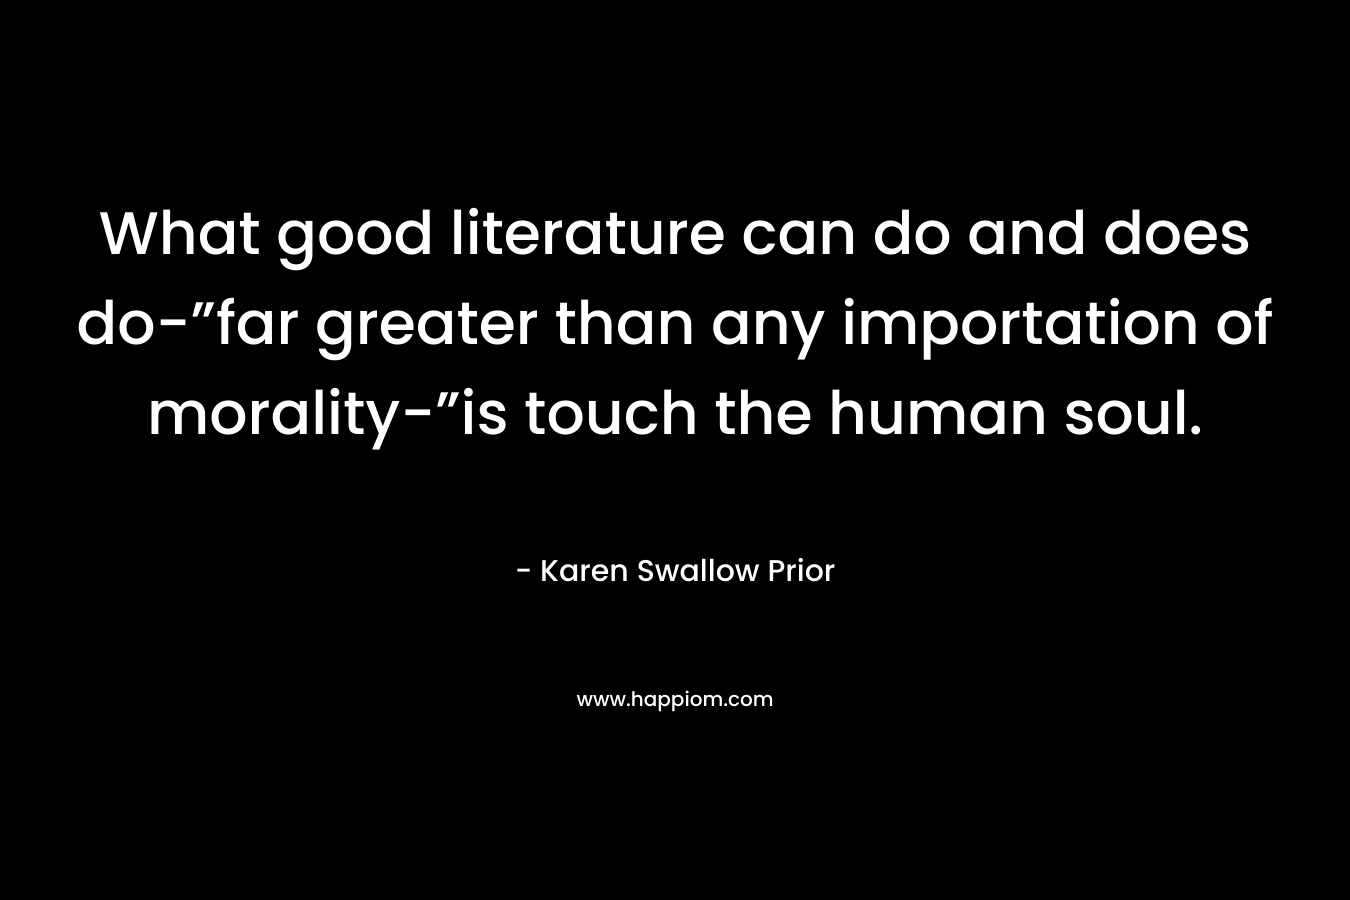 What good literature can do and does do-”far greater than any importation of morality-”is touch the human soul.